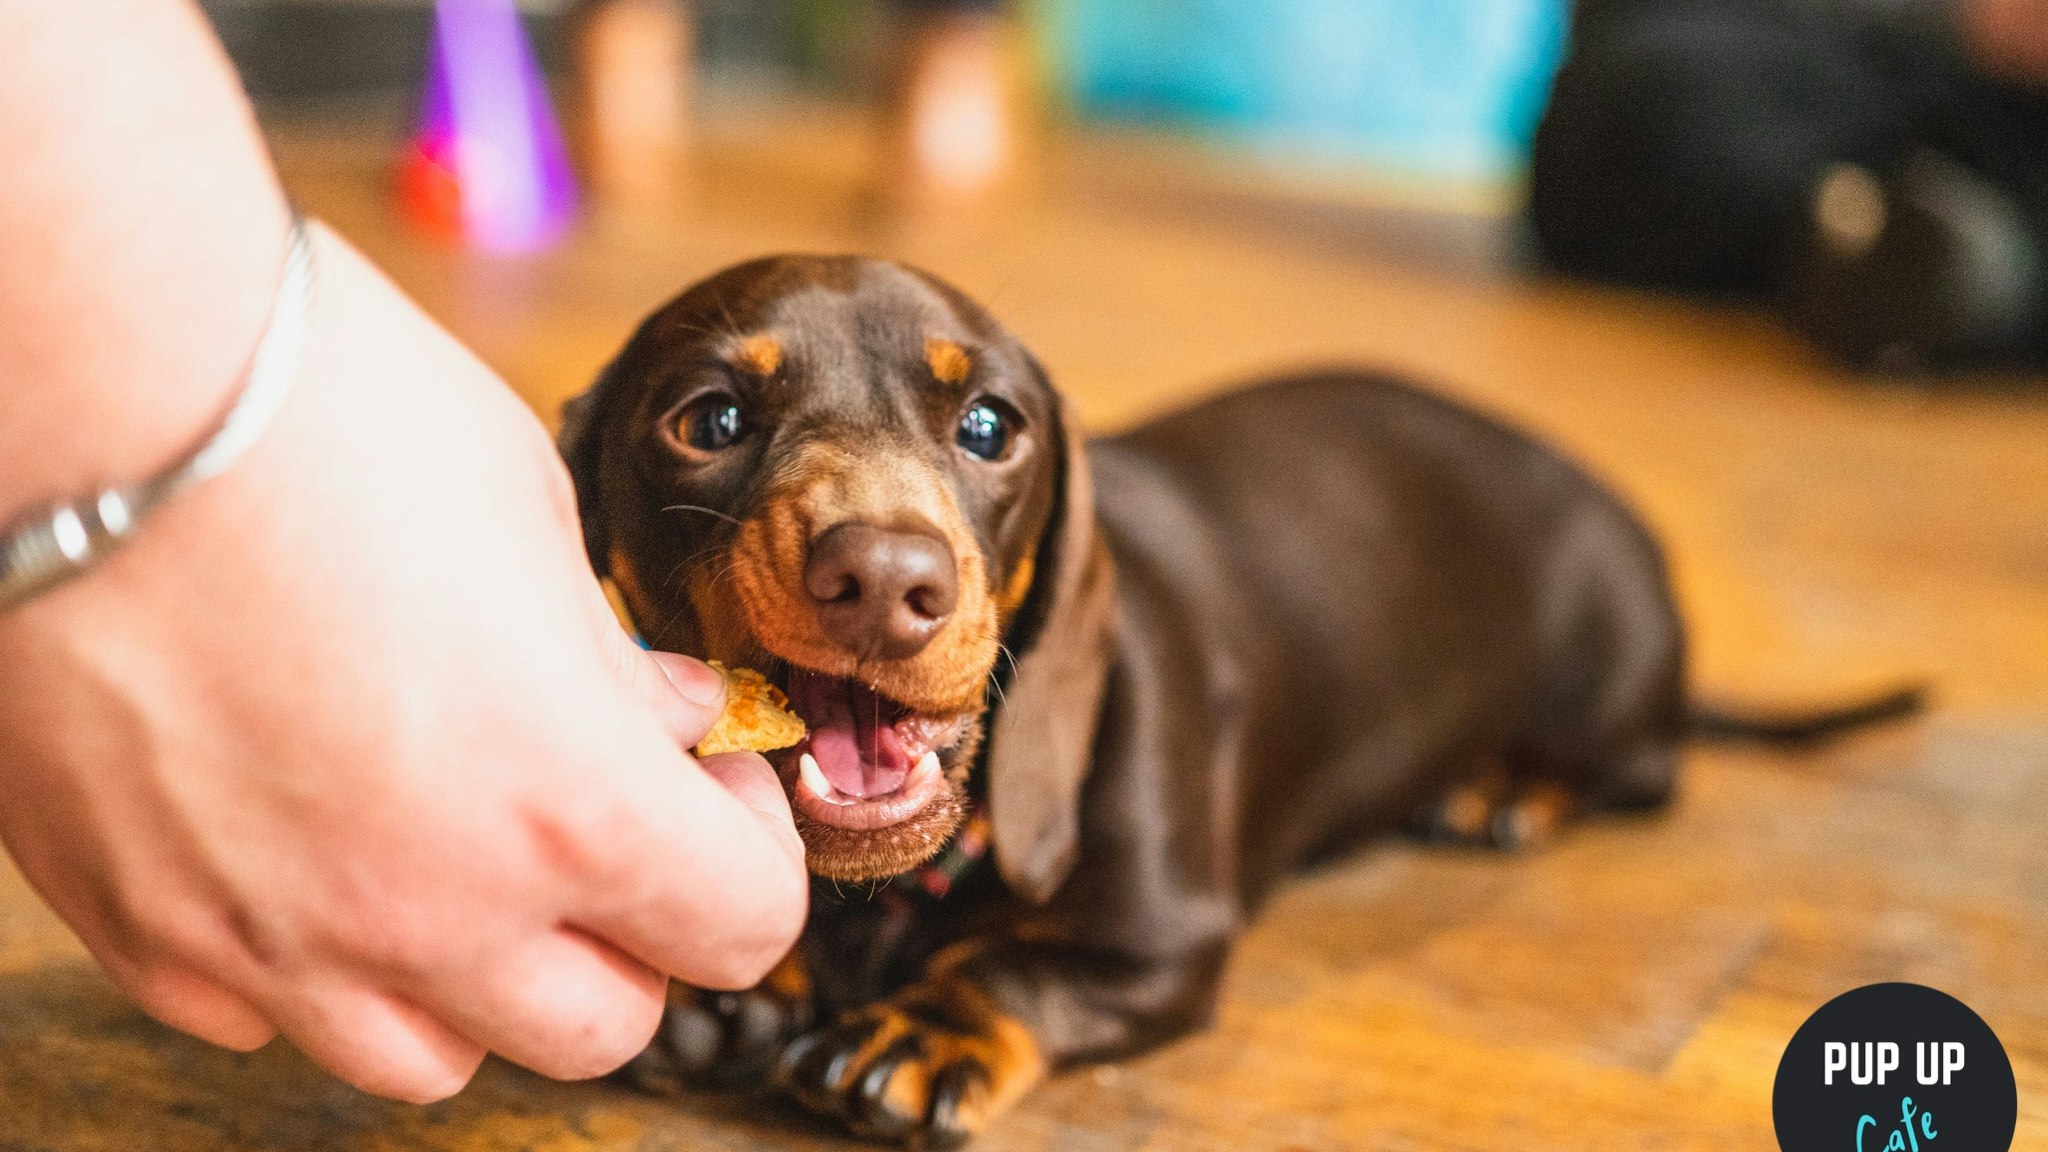 Dachshund Pup Up Cafe – Manchester